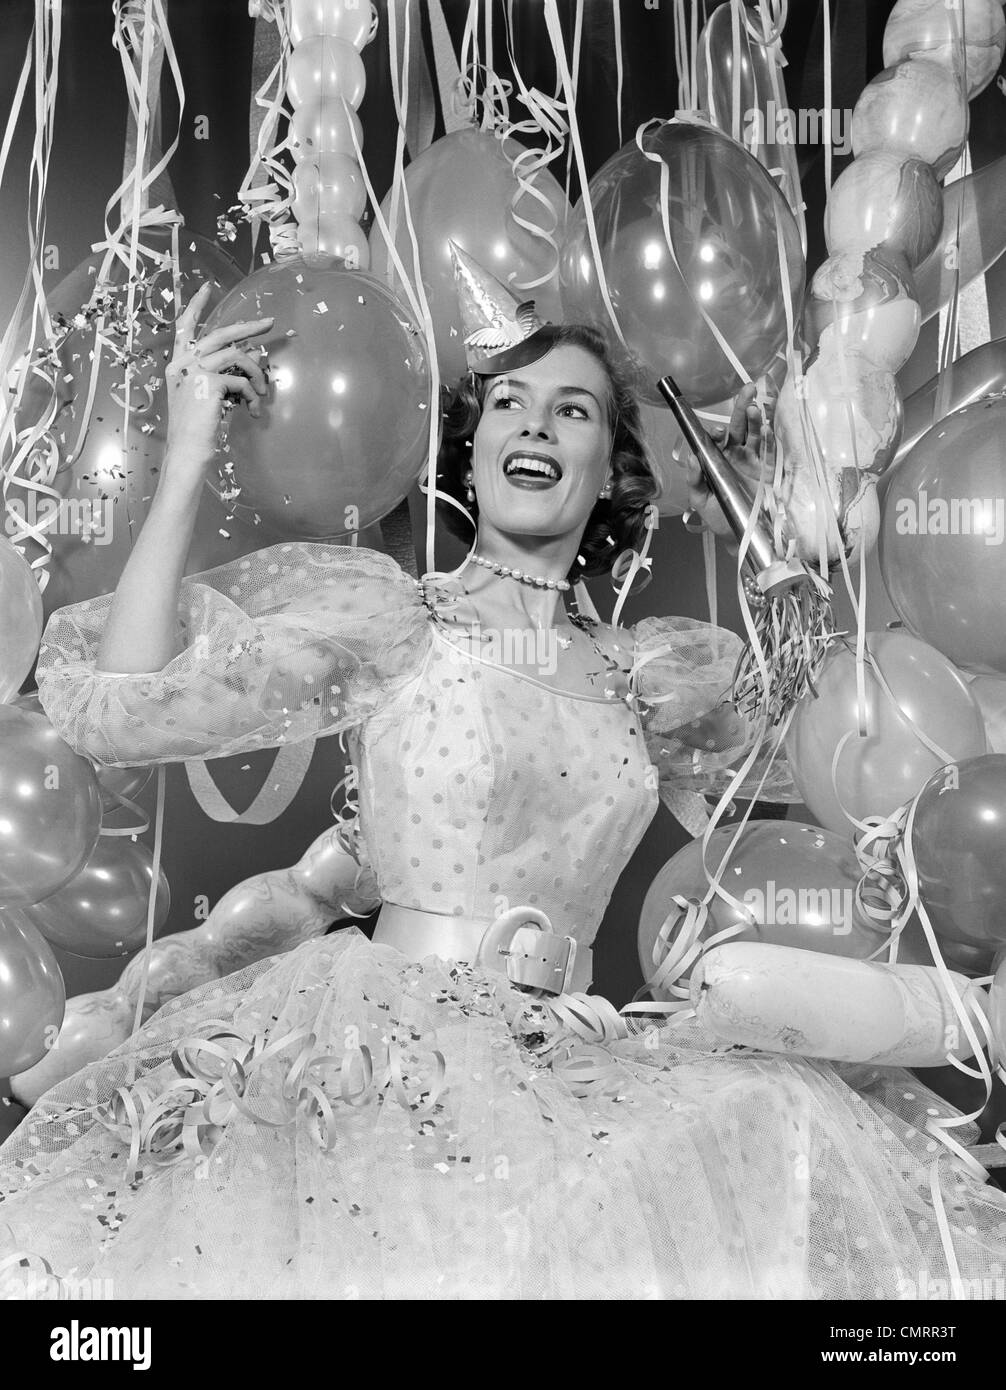 1950s WOMAN IN PARTY DRESS SURROUNDED BY STREAMERS & BALLOONS Stock Photo